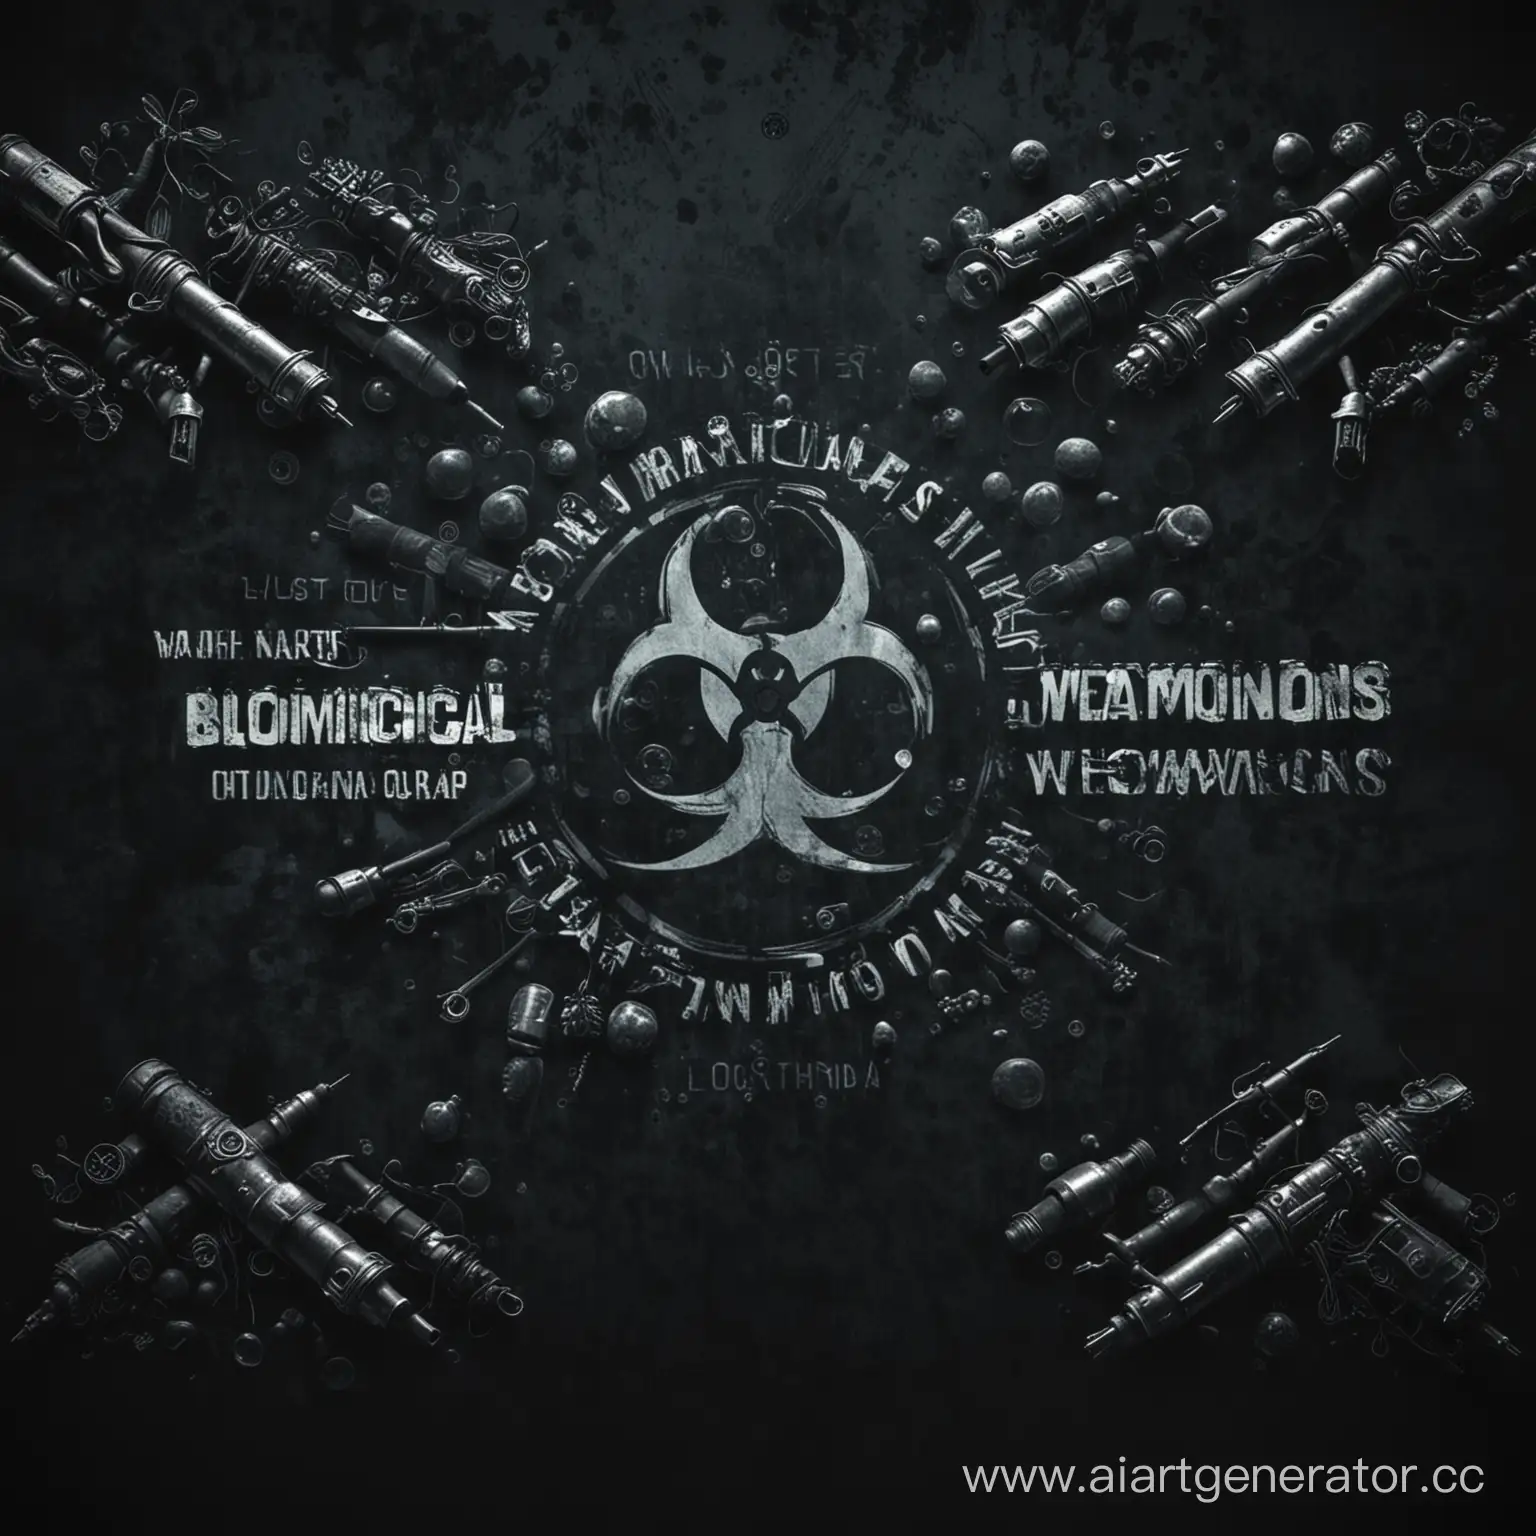 Sinister-Presentation-of-Biological-Weapons-in-a-Dark-Setting